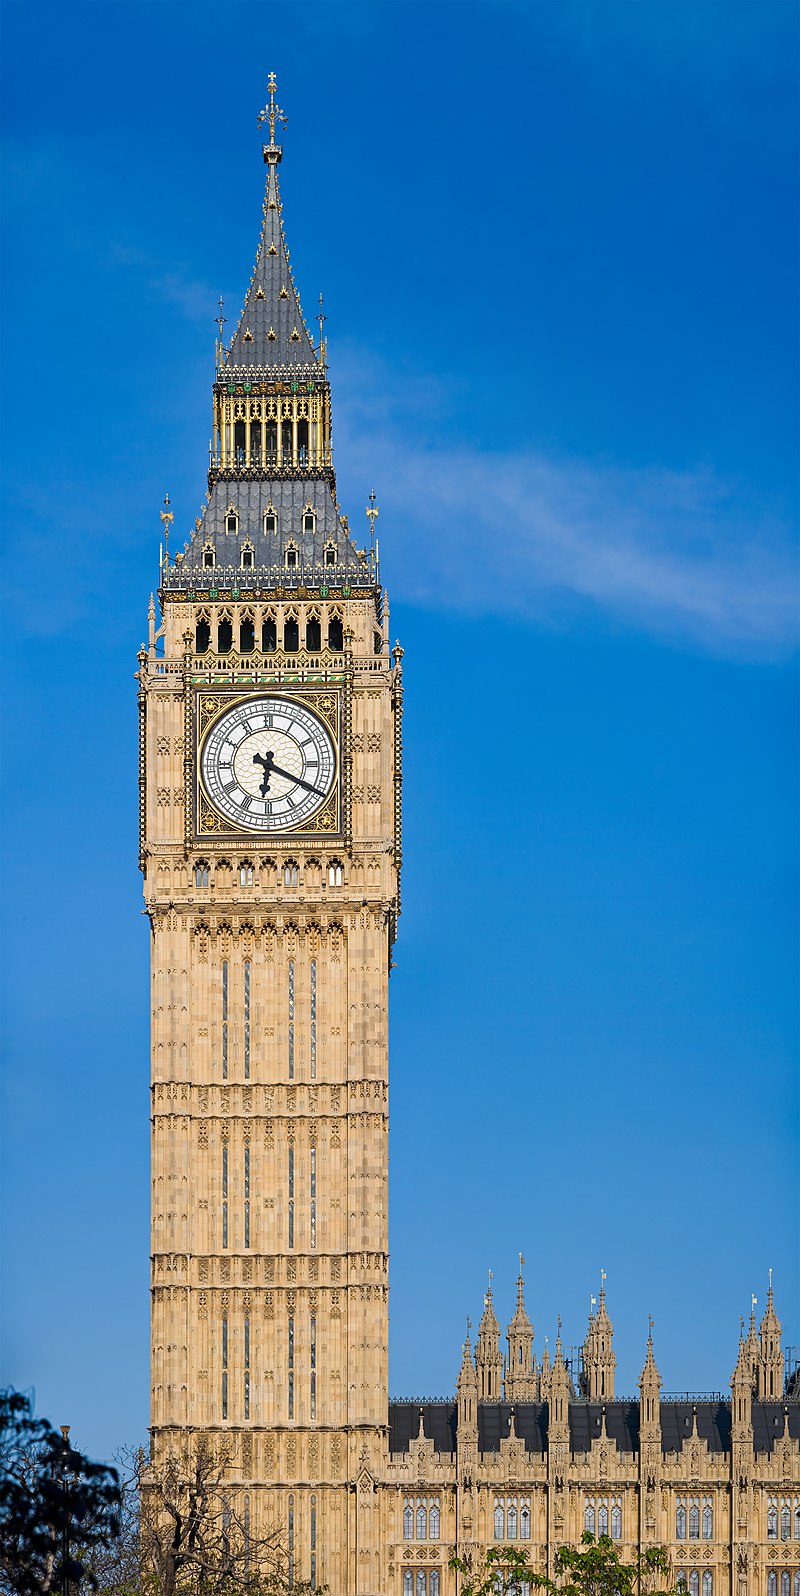 Picture of the Big Ben, the clock tower in London